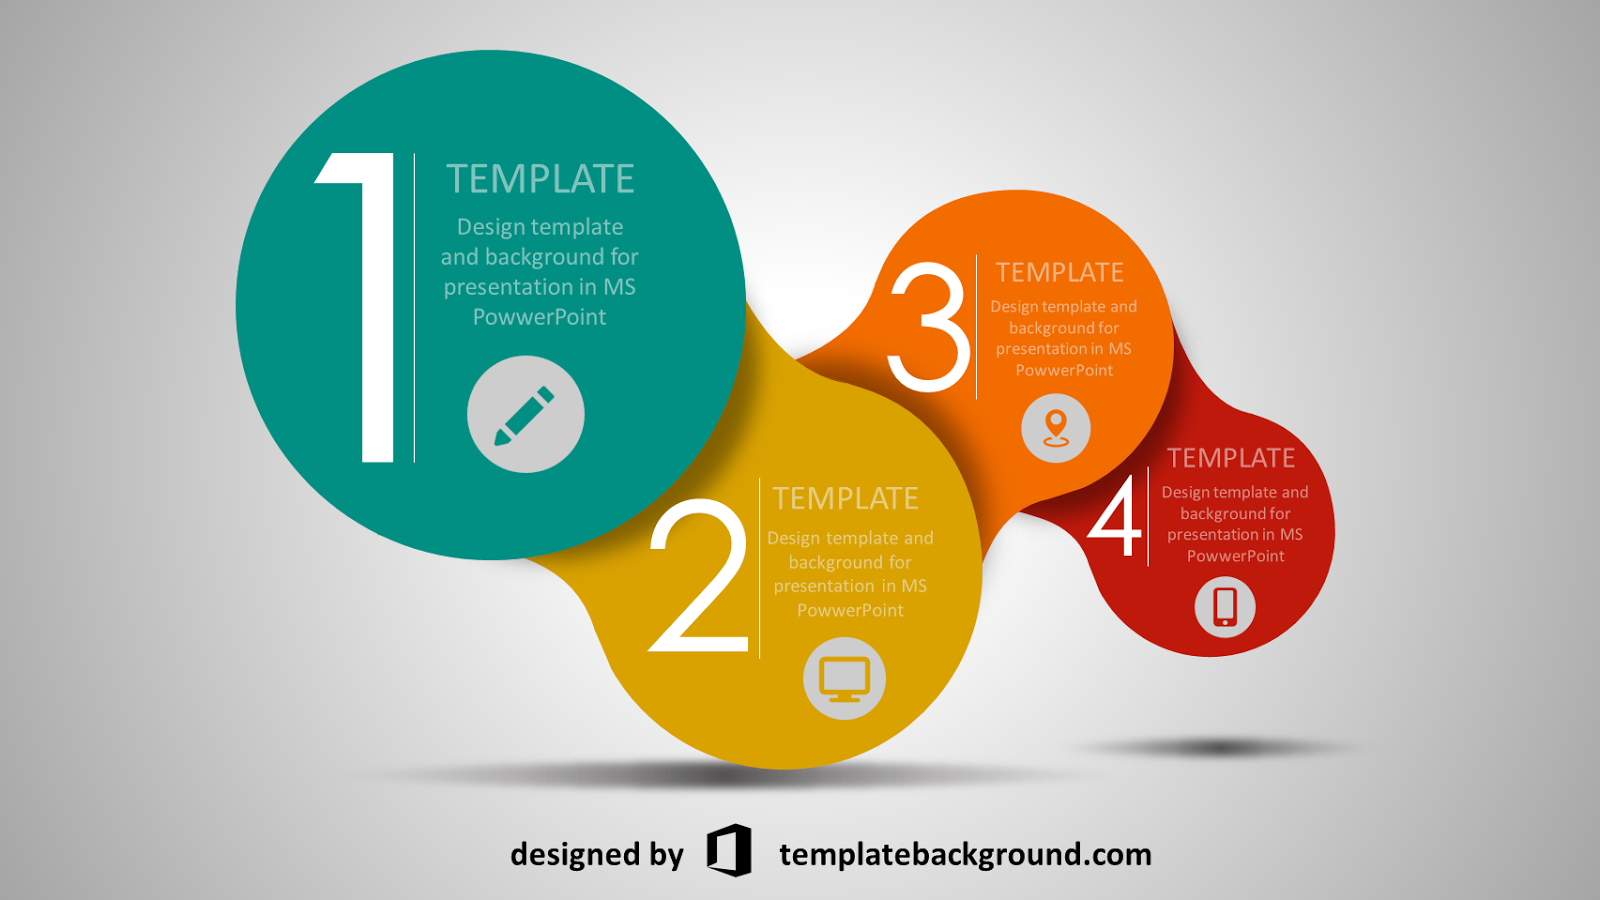 Animated Templates For Powerpoint 2010 Free Download Themes With Powerpoint Animated Templates Free Download 2010